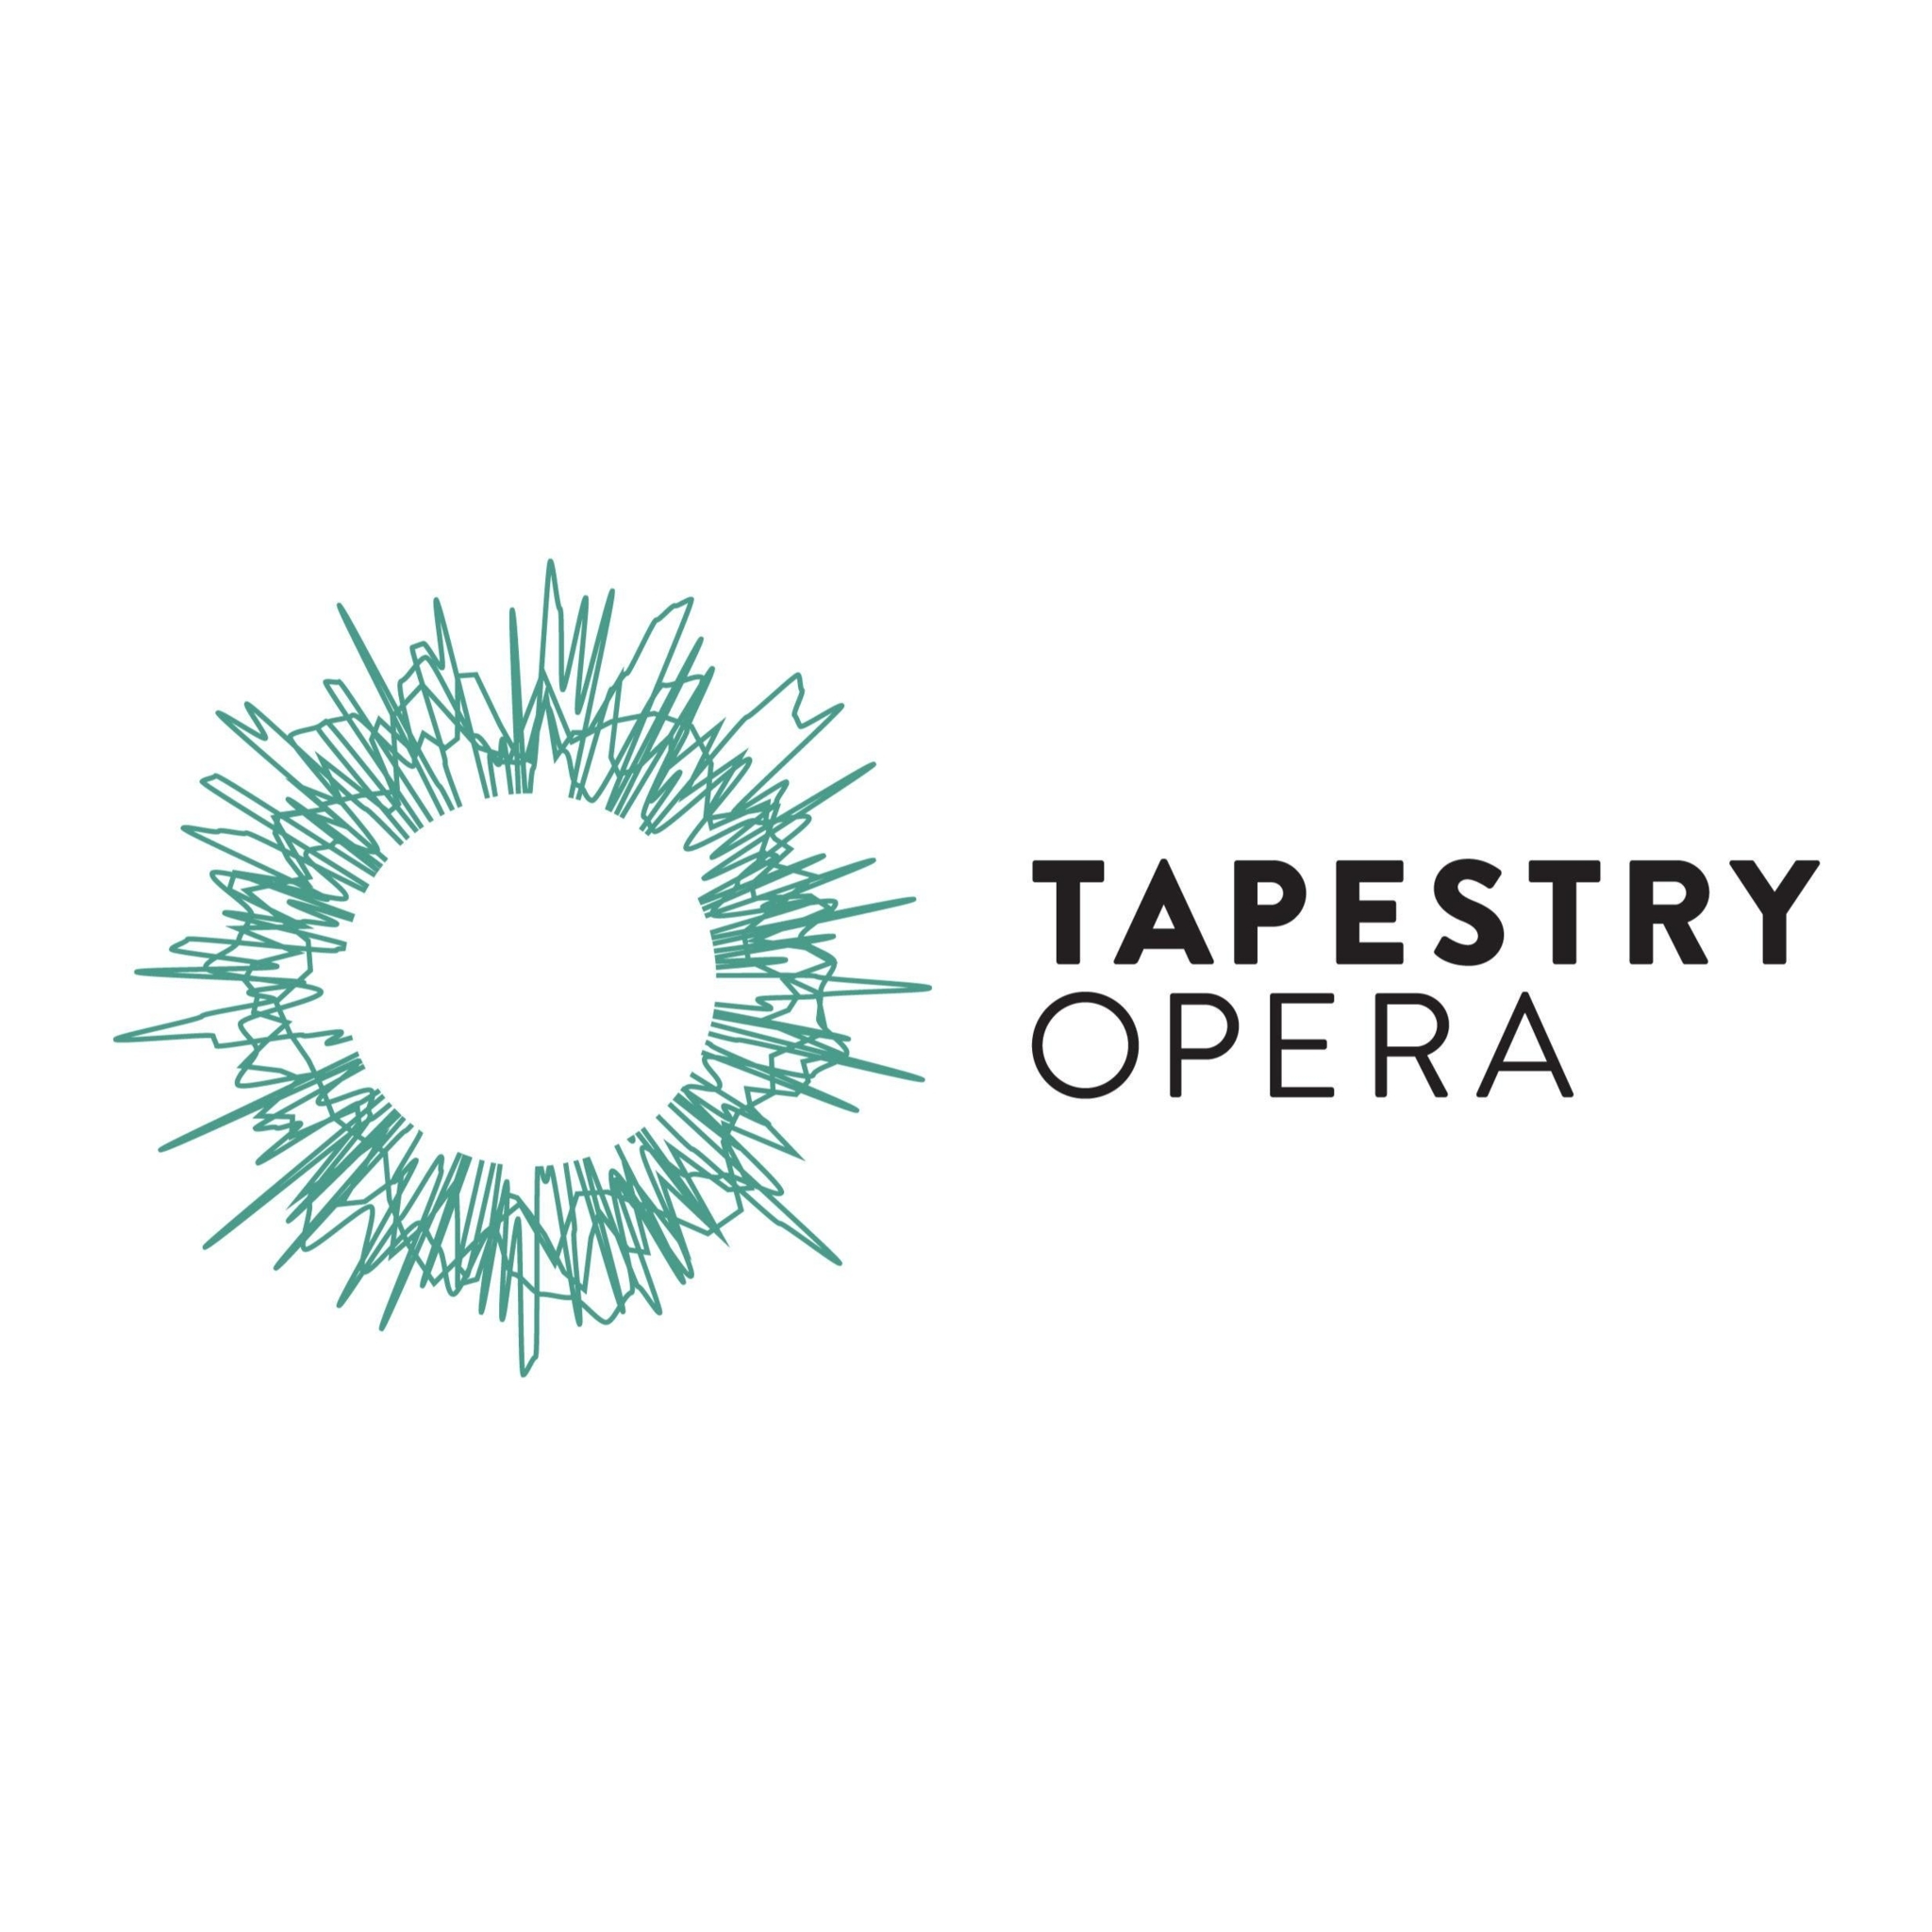 Tapestry Opera - Compagnies d'opéra